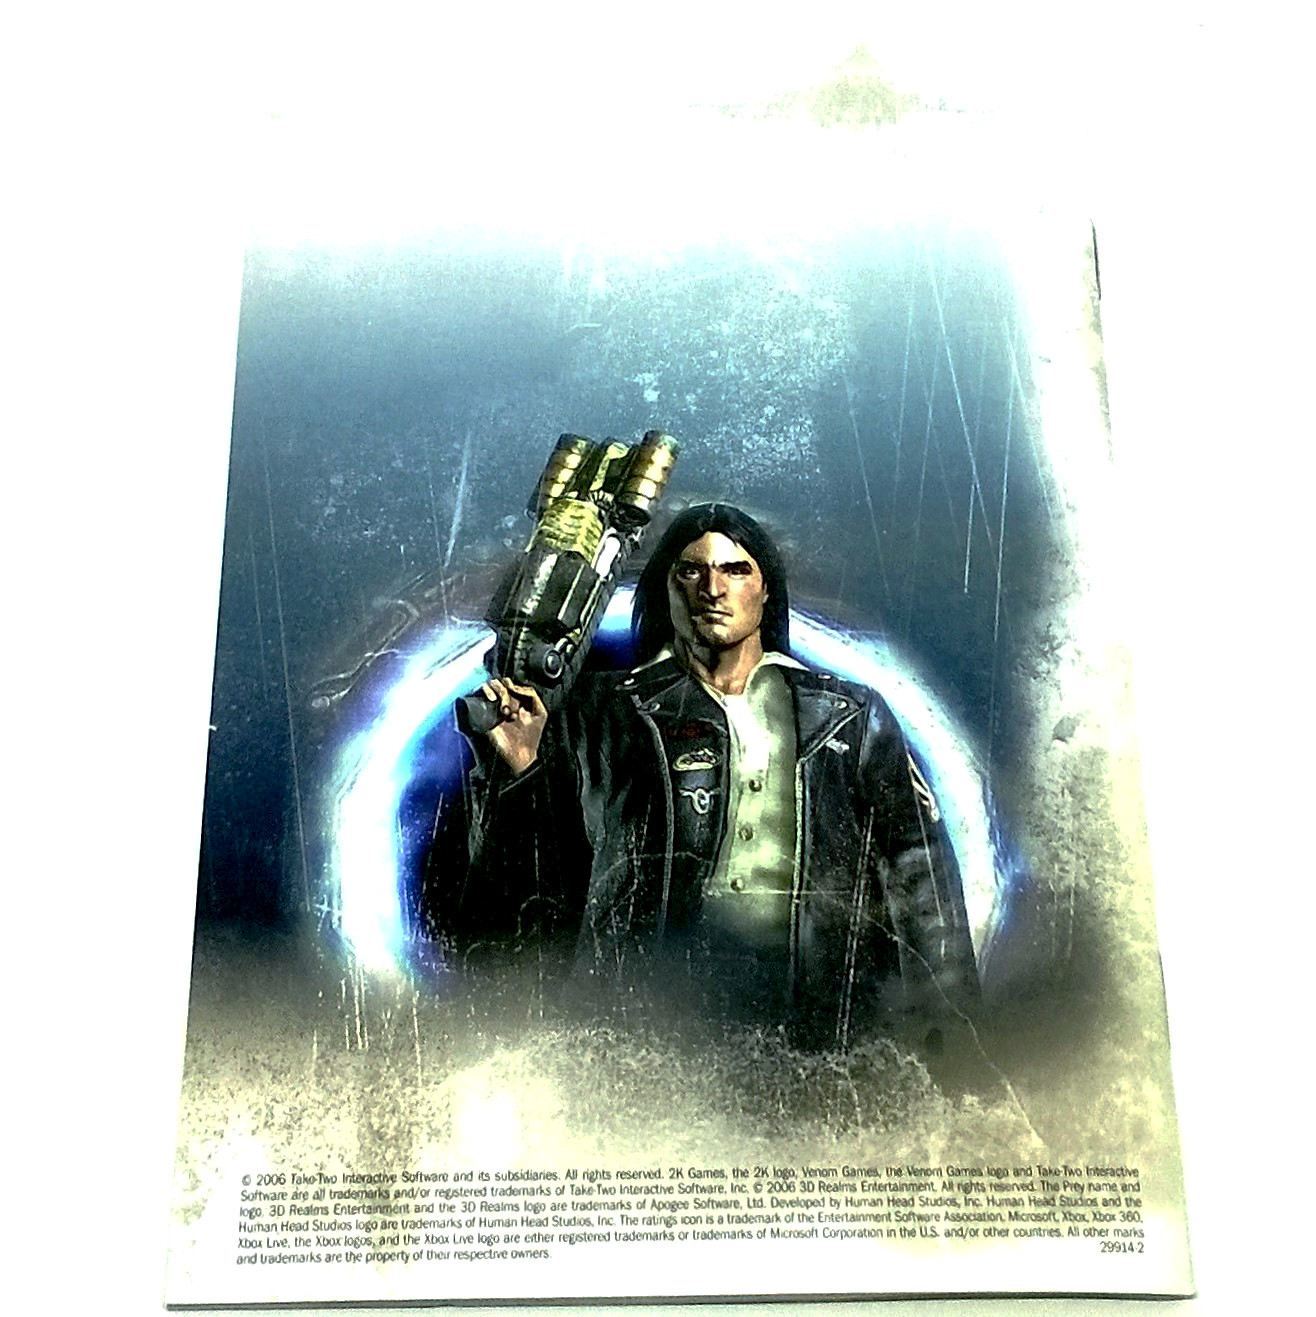 Prey for Xbox 360 - Back of manual